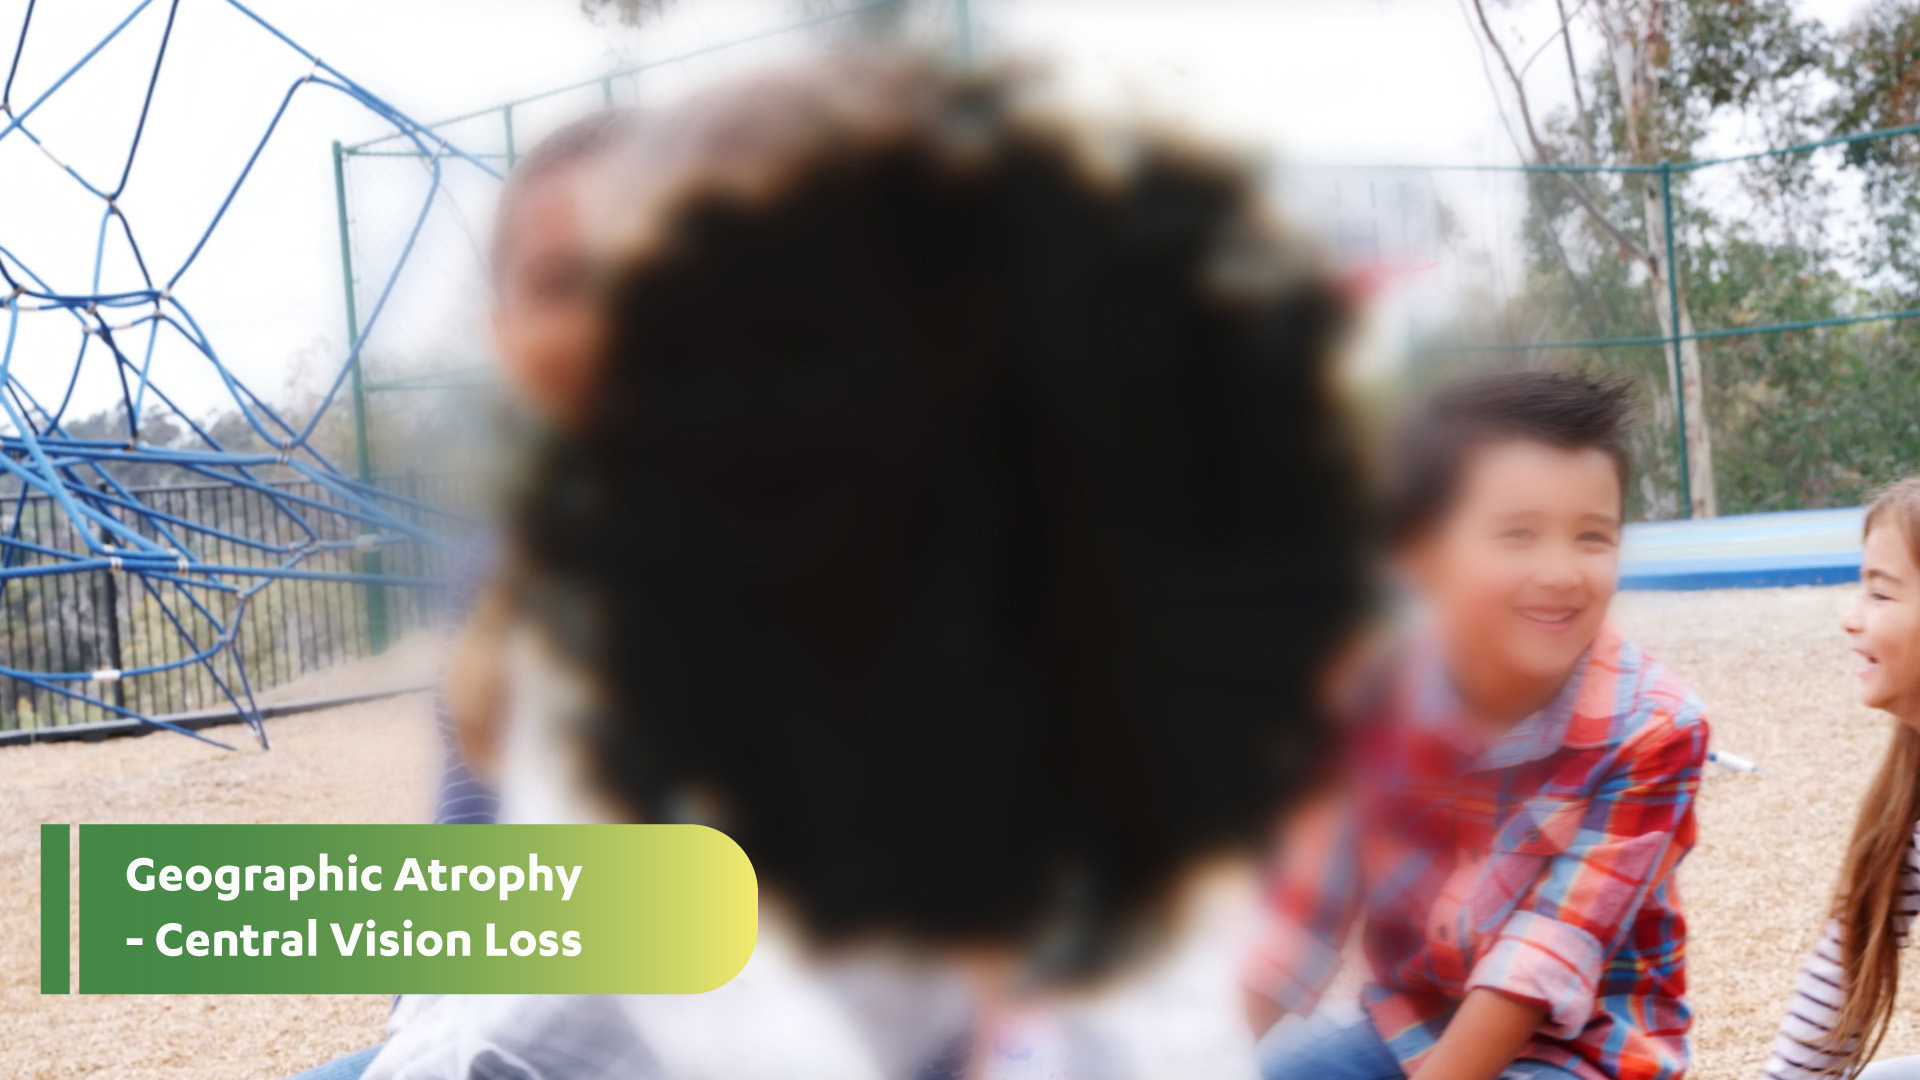 Geographic Atrophy - Central Vision Loss: Photo of young girl in a gray checkered shirt smiling with other children on a playground. The center of the image is completely dark so you can no longer see the girl's face, showing central vision loss.